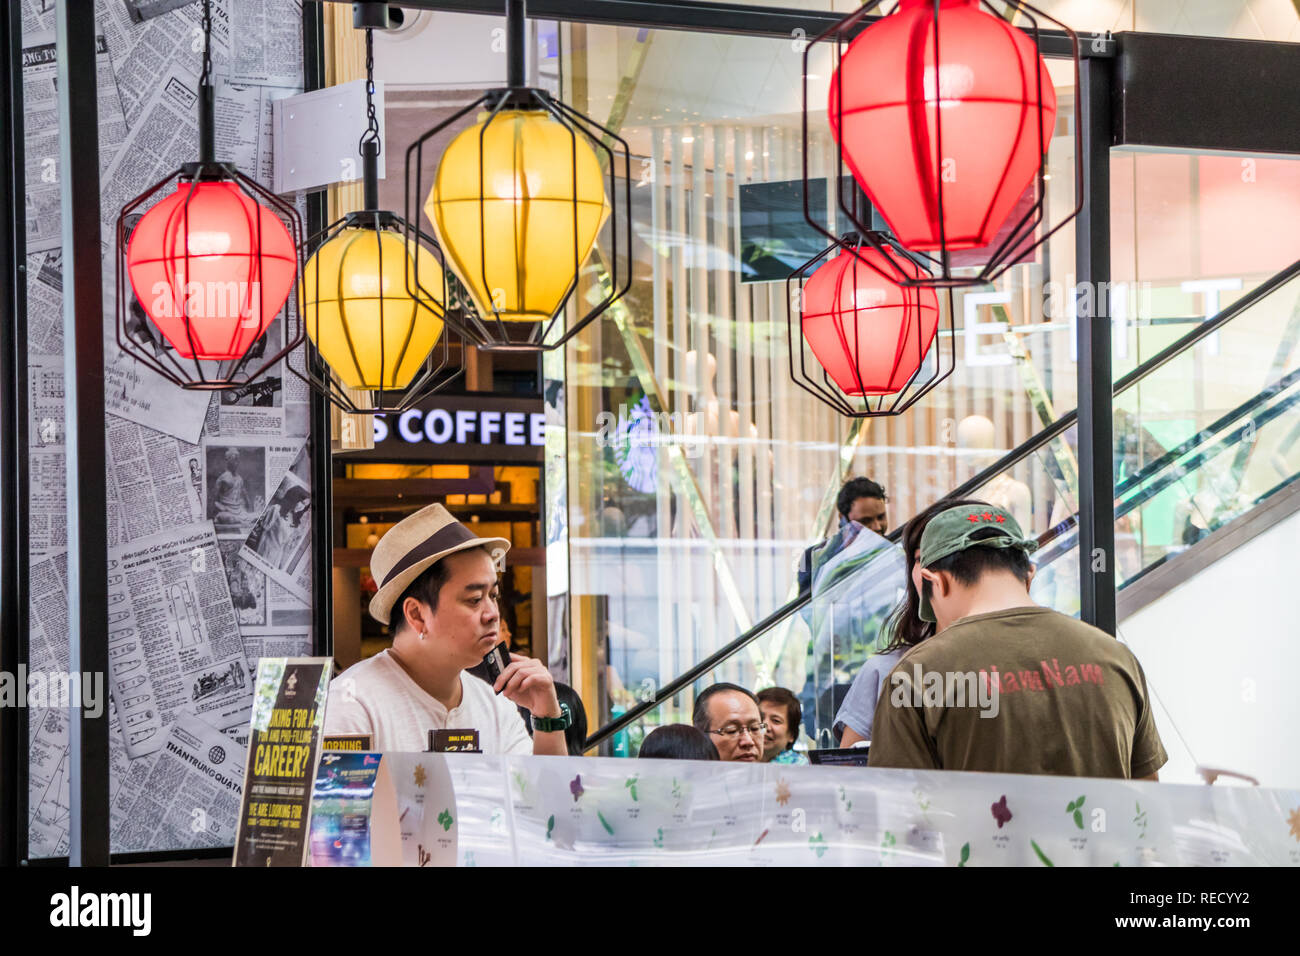 https://c8.alamy.com/comp/RECYY2/singapore-24th-december-2018-man-waiting-for-coffee-in-singapura-shopping-mall-there-are-many-coffee-shops-in-the-city-RECYY2.jpg